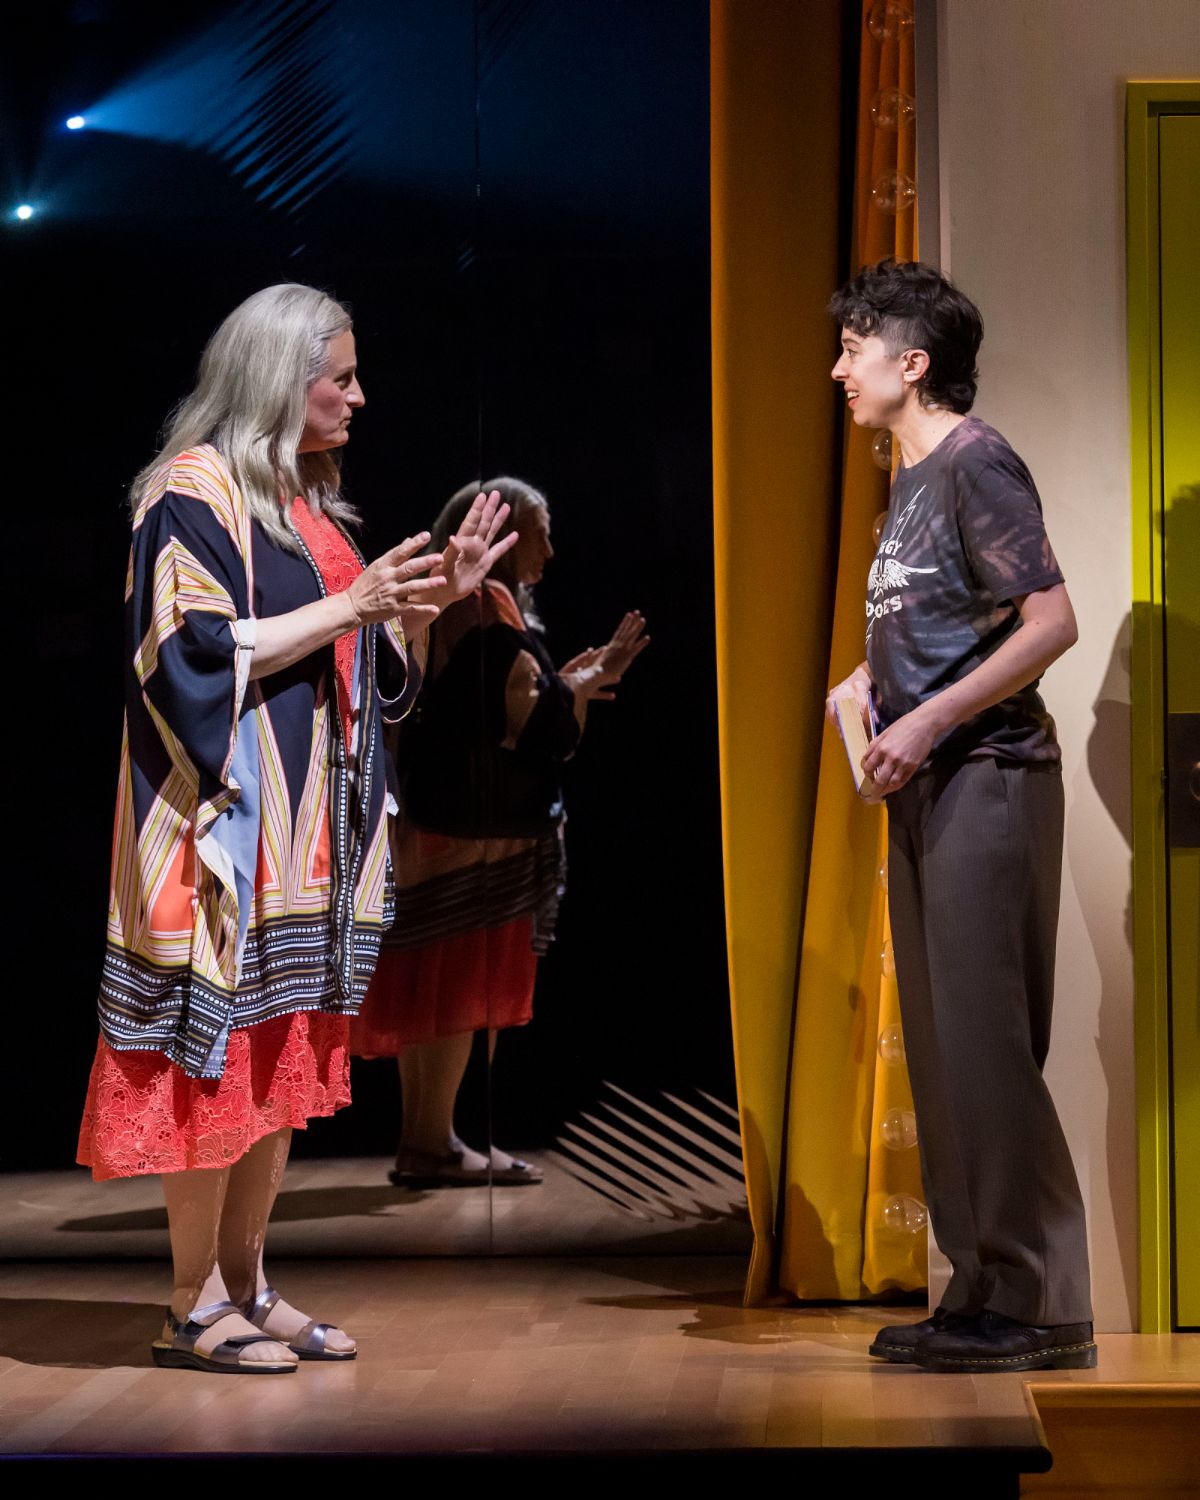 PHOTO: Craig Schwartz | The South Pasadenan | From L to R: Sarah Stiles, Adina Verson, and Zachary Prince (center) and the cast of "A Transparent Musical" in the world premiere of "A Transparent Musical" at Center Theatre Group / Mark Taper Forum May 23 through June 25, 2023. 